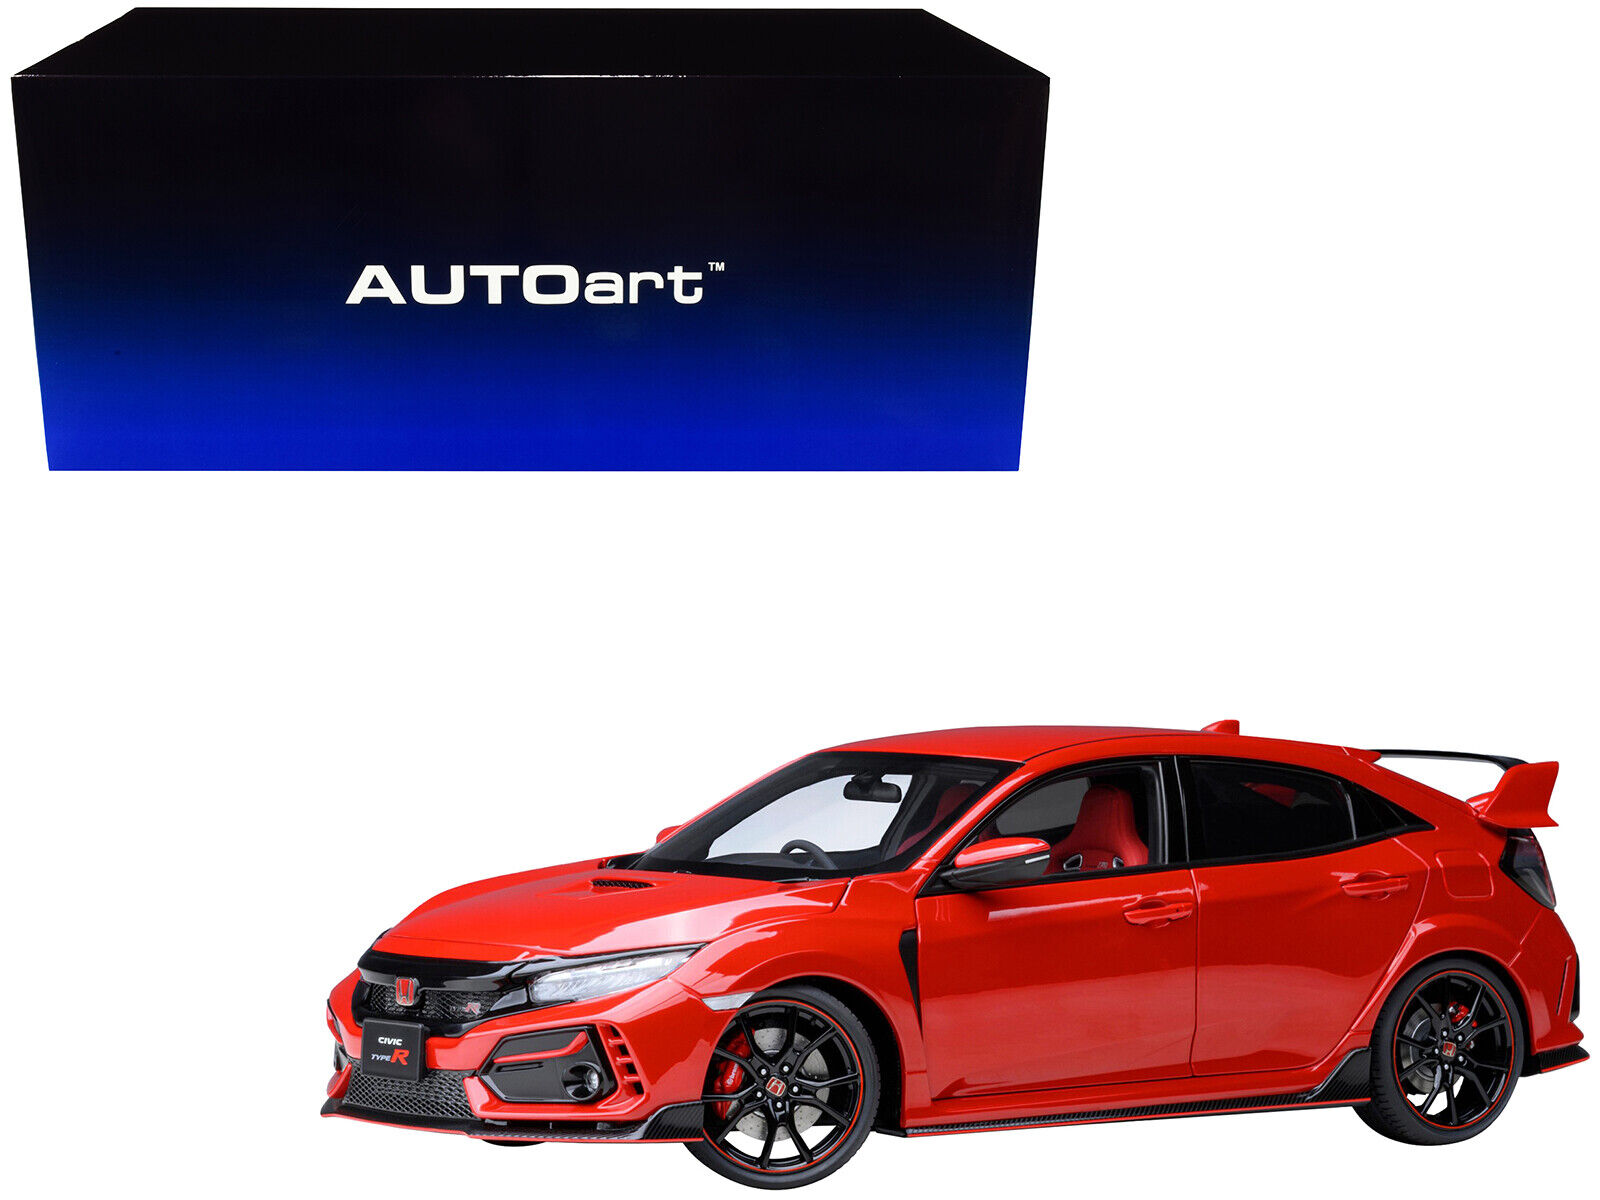 2021 Honda Civic Type R (FK8) RHD (Right Hand Drive) Flame Red 1/18 Model Car by